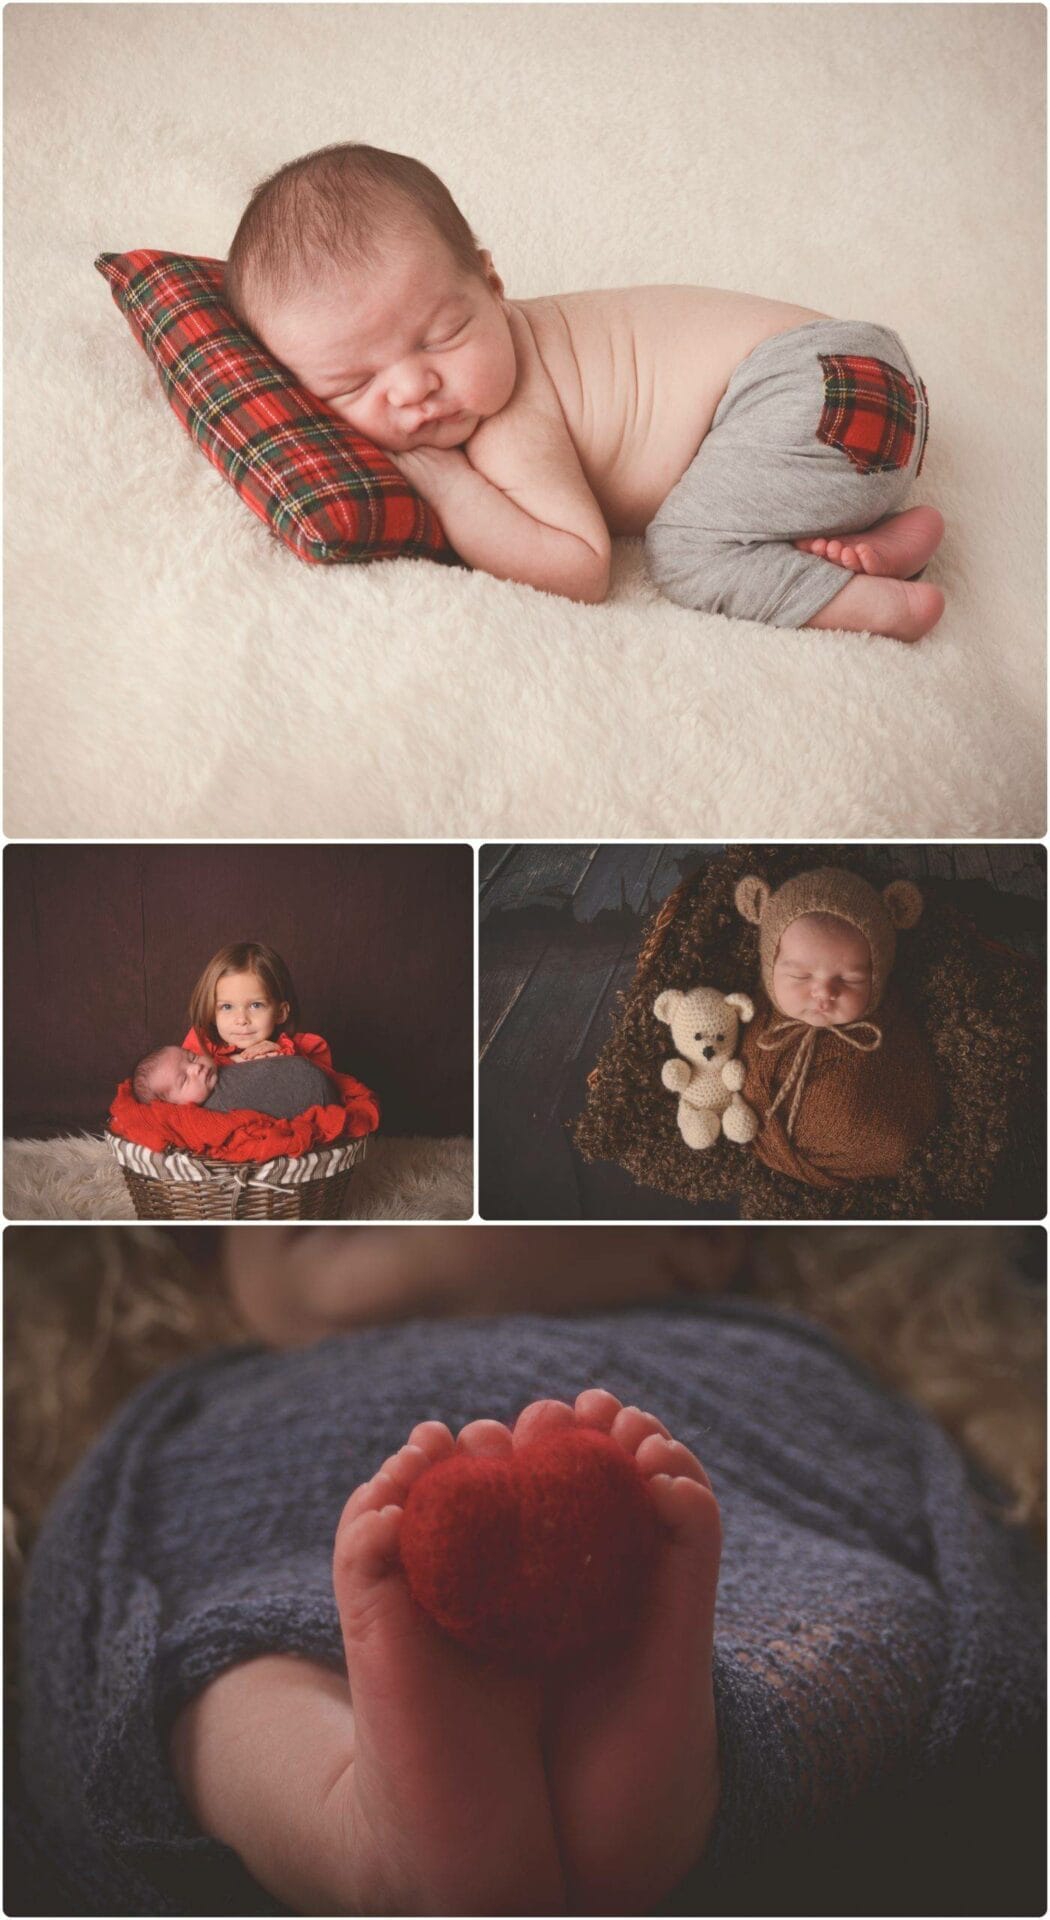 A collage of photos of a baby sleeping in a blanket with a teddy bear.